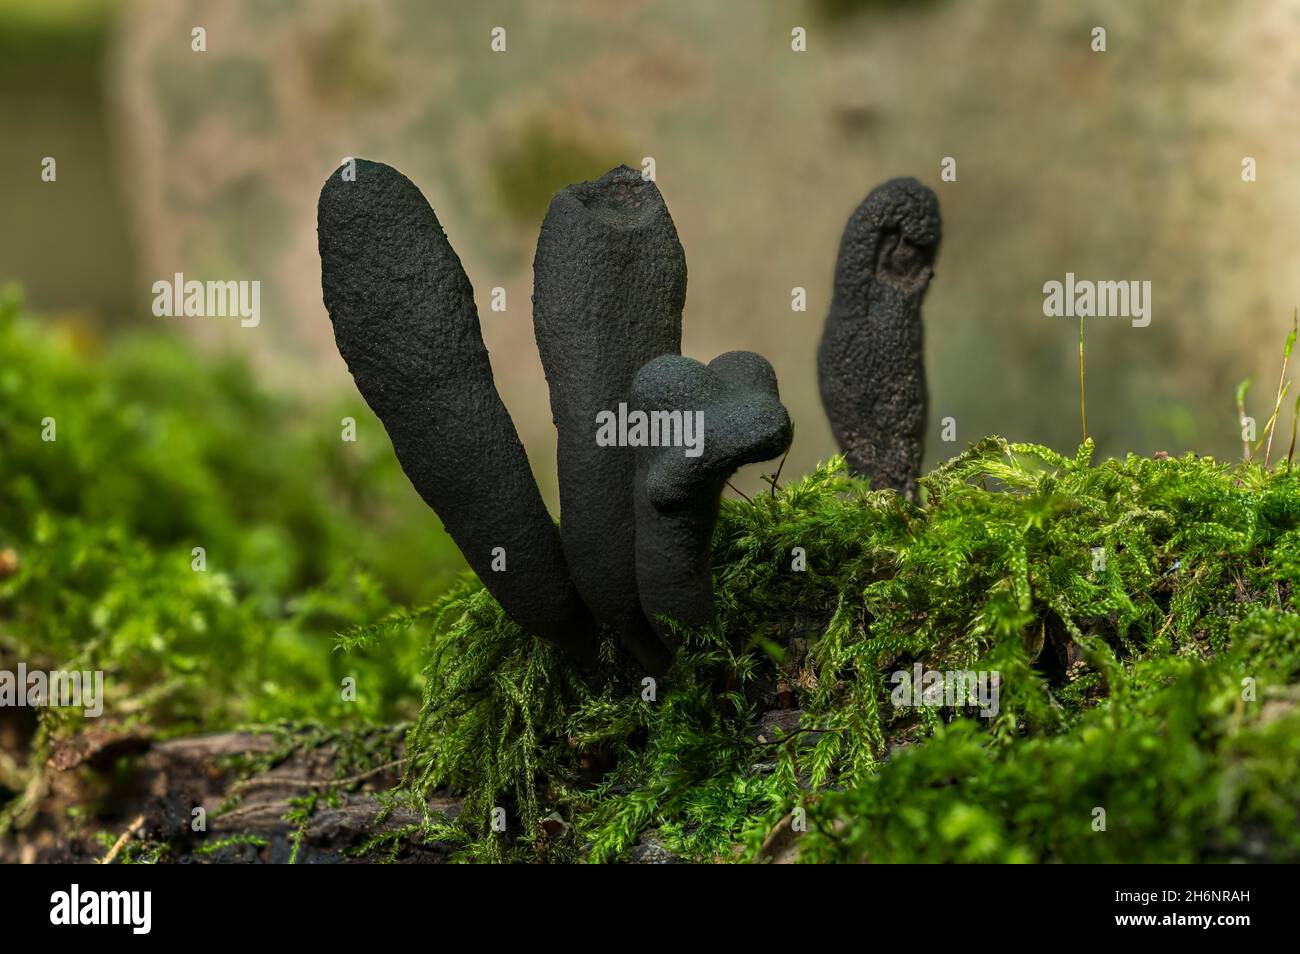 Mushroom, long-stalked wood club (Xylaria longipes) on deadwood, inedible, Moenchbruch, Ruesselsheim am Main, Hesse, Germany Stock Photo